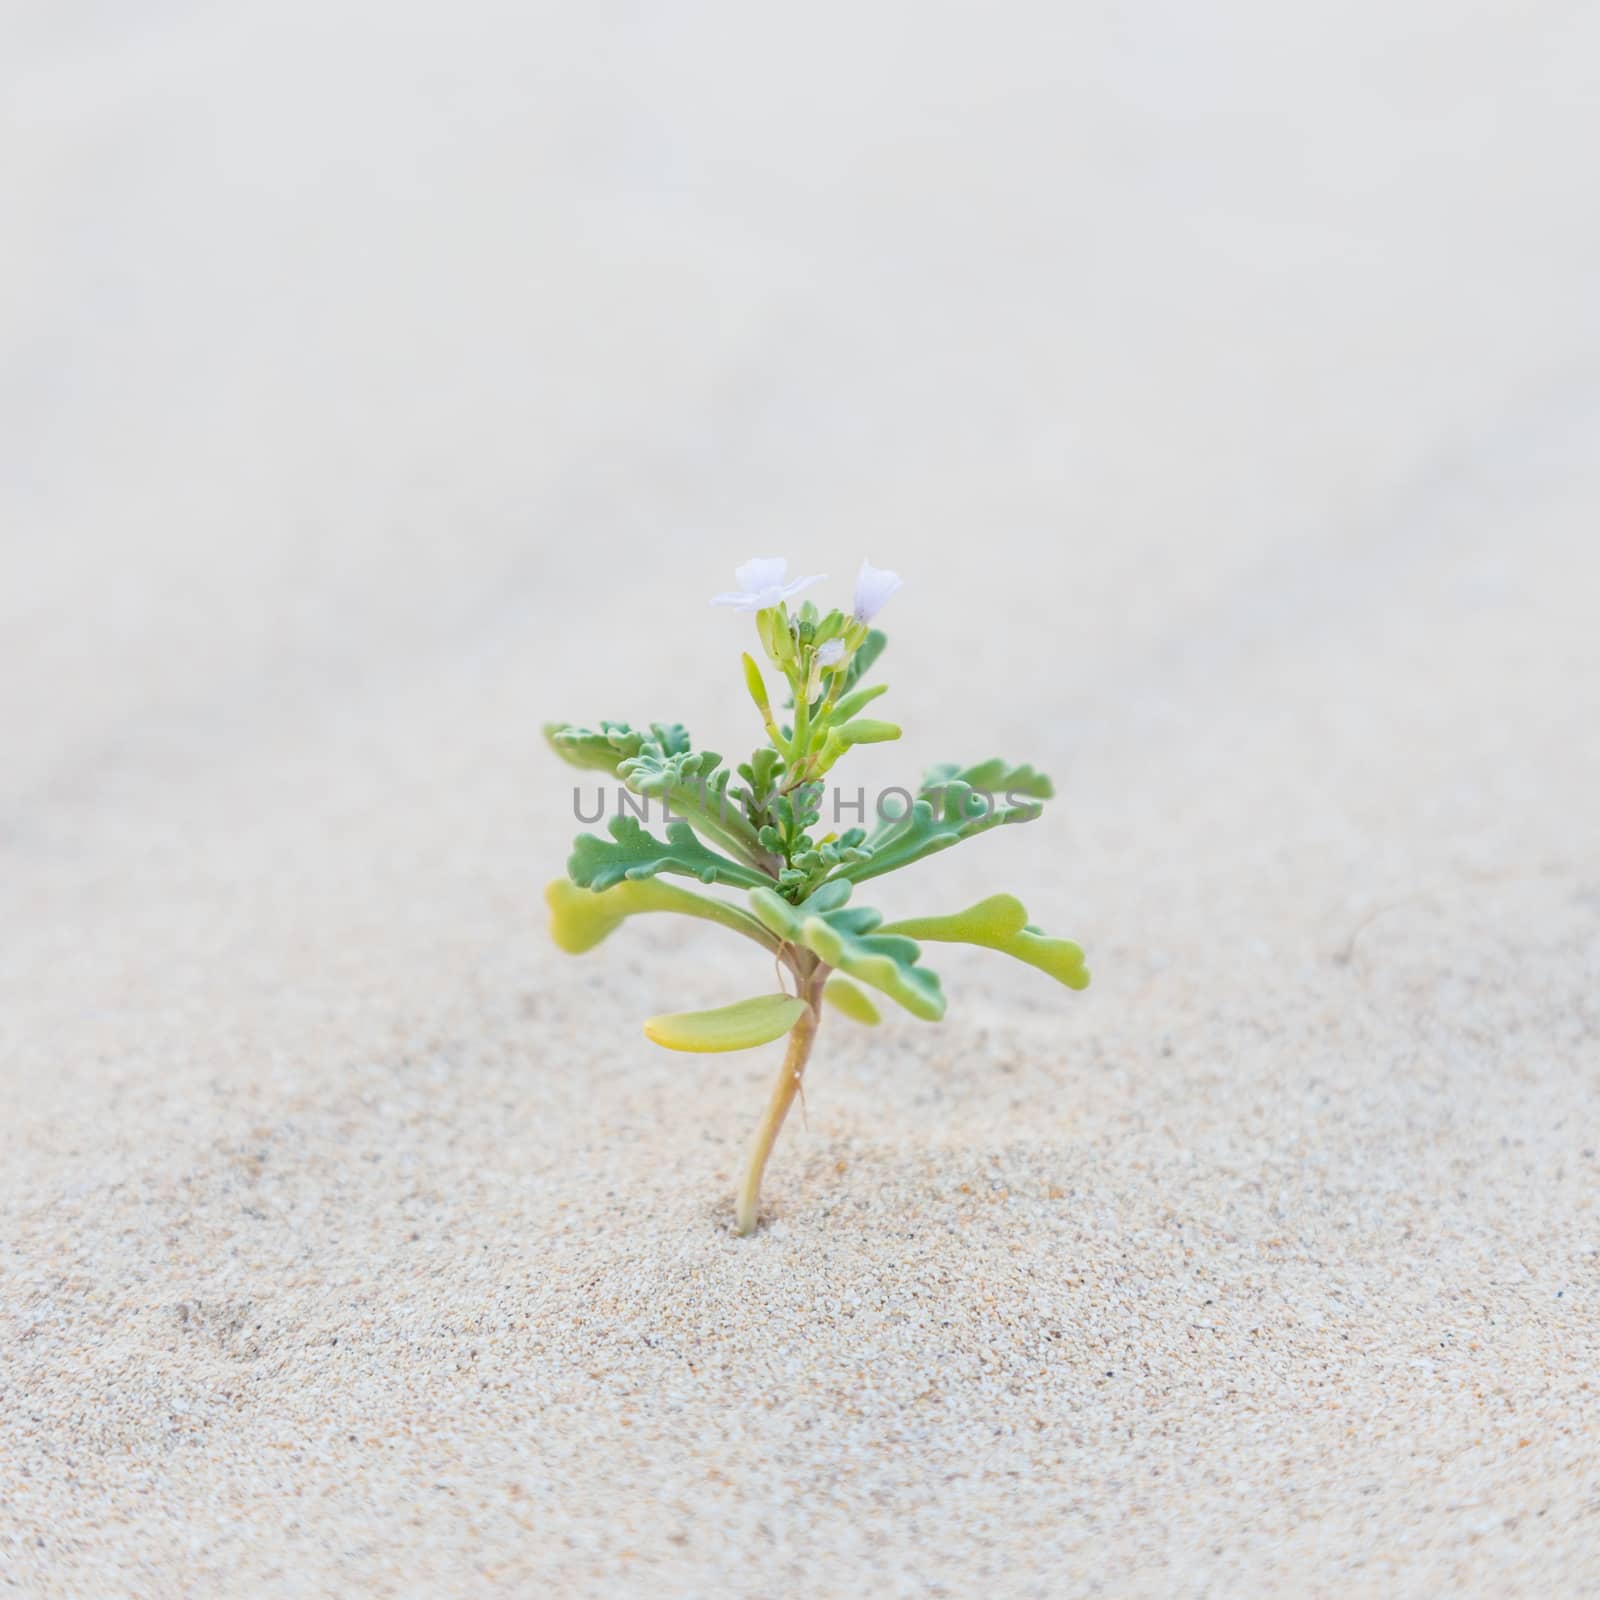 Single sprout blooming in desert sands. New life concept. 